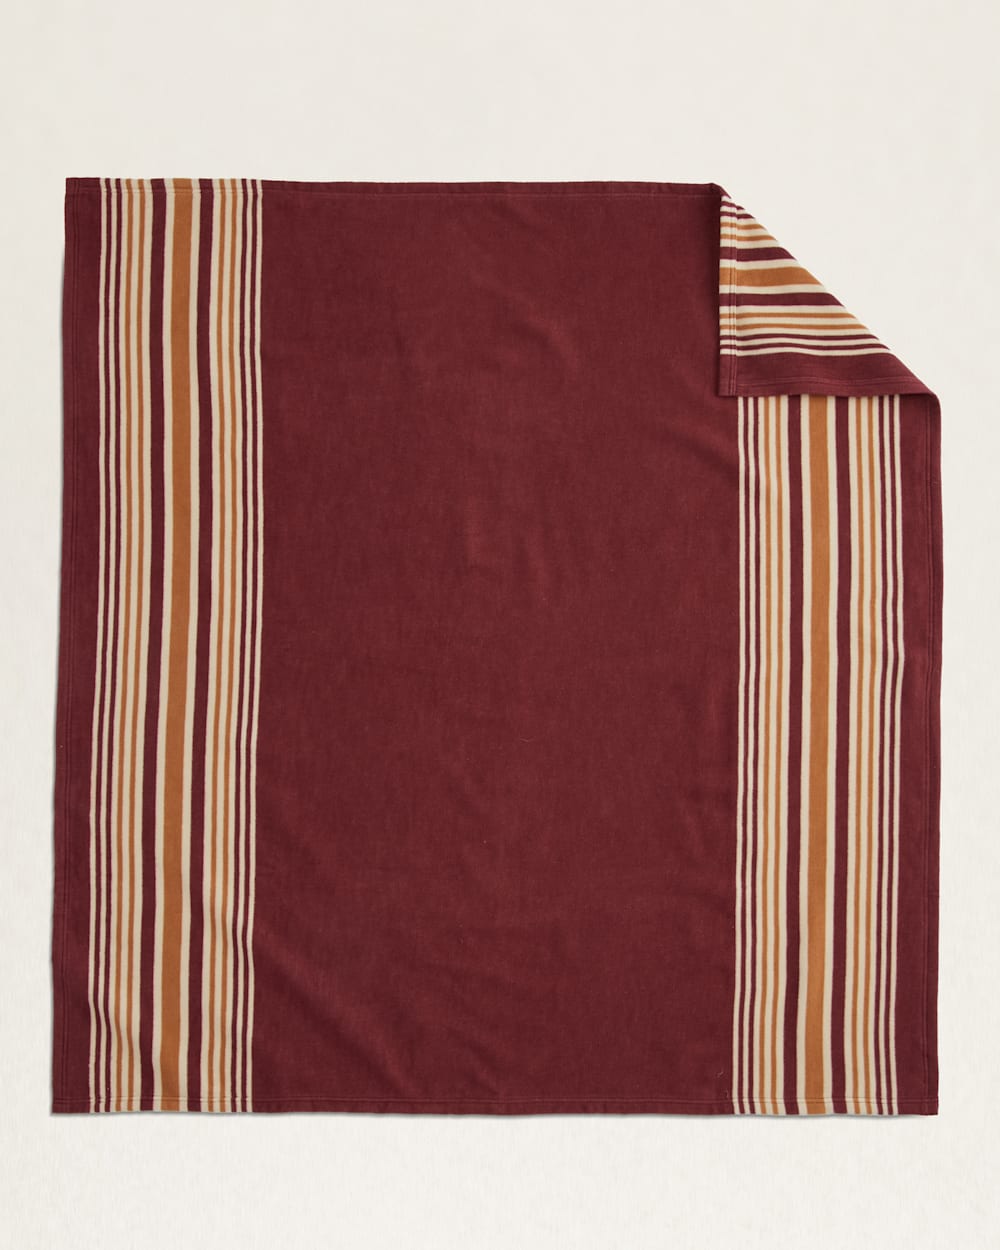 ALTERNATE VIEW OF CARICO LAKE/STRIPE ORGANIC COTTON THROW GIFT PACK IN SANDSHELL/ANDORA image number 4